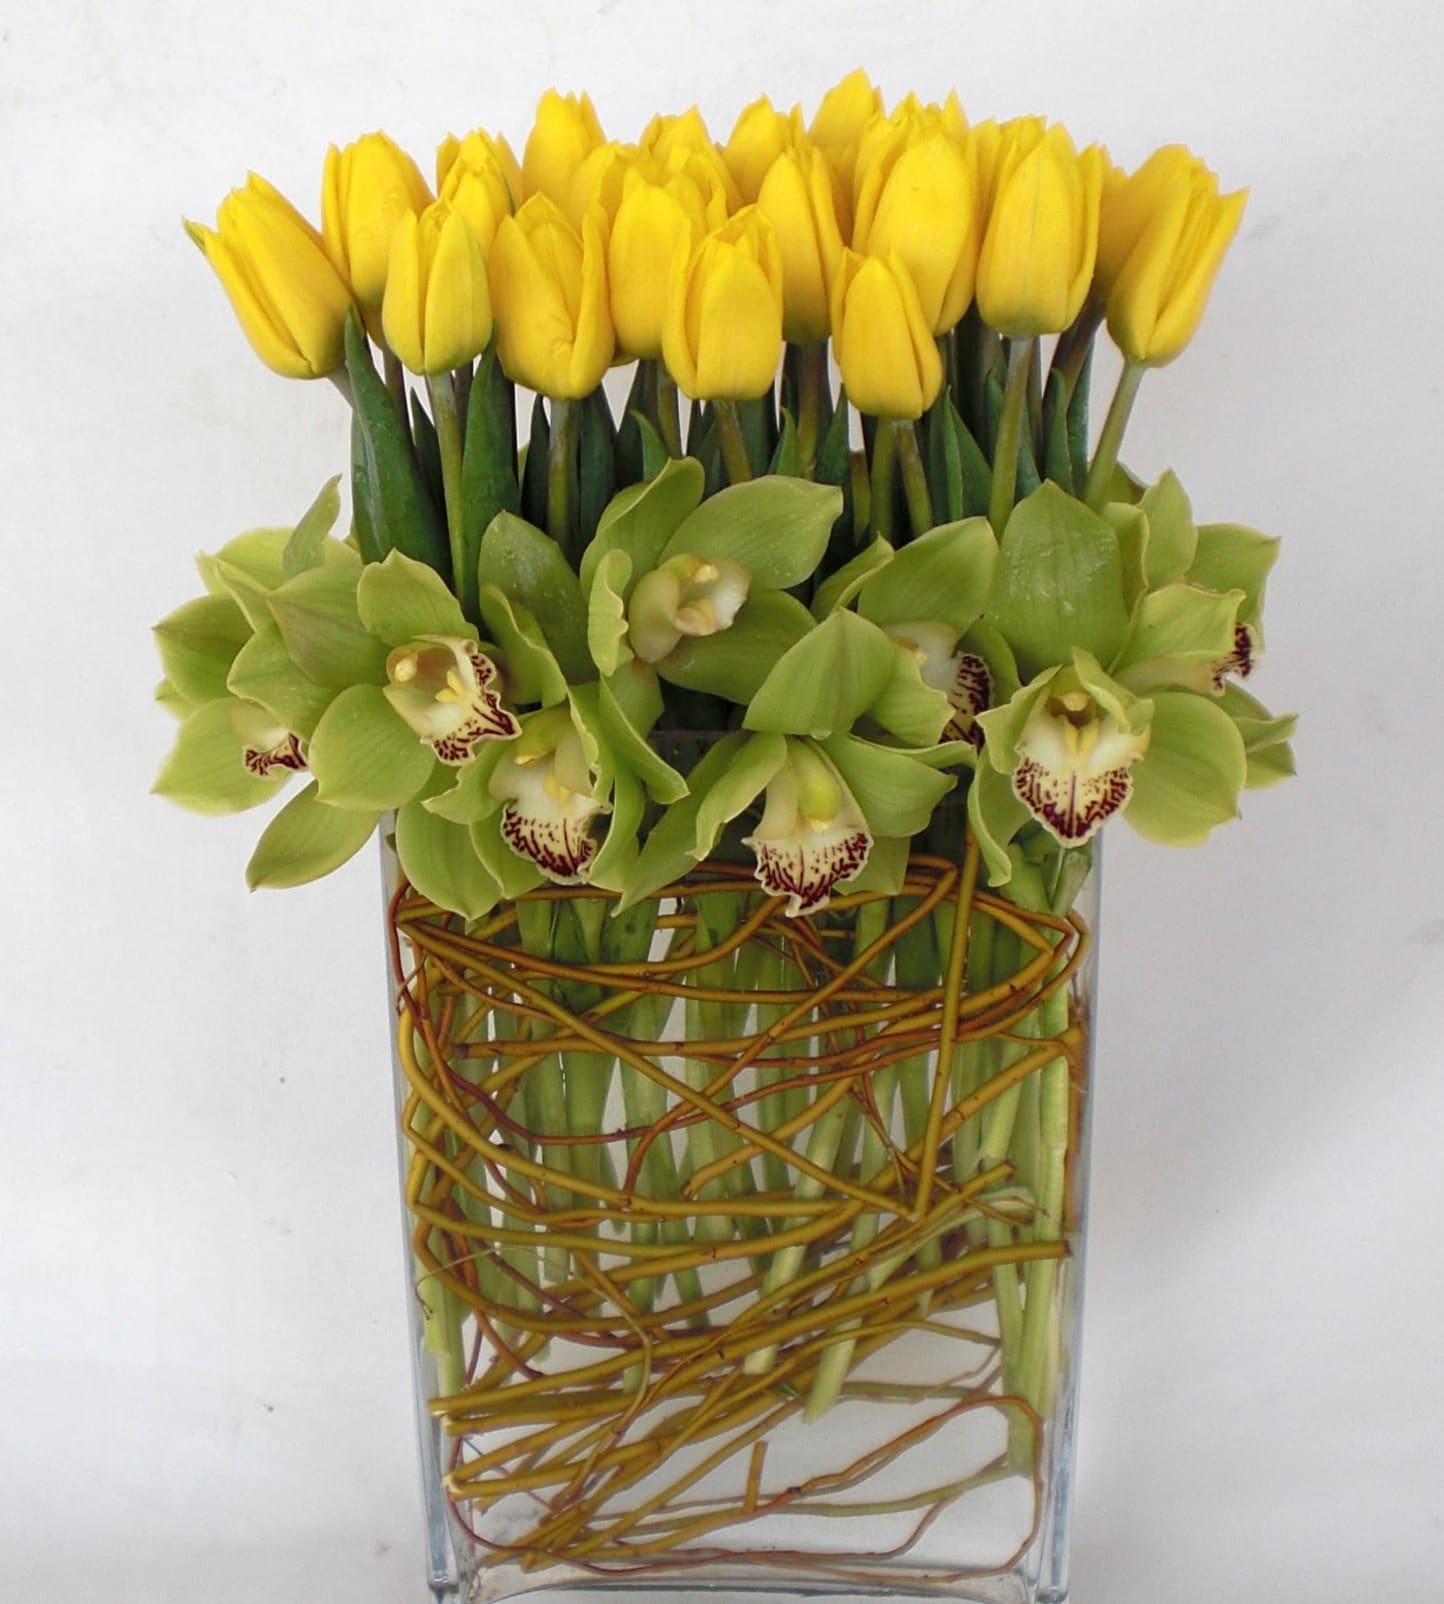 Yellow Tulip Garden - Simple and beautiful yellow tulips with cymbidium orchid blooms.  This simple yet elegant floral arrangement is a perfect combination of yellow tulips and cymbidium orchid blooms. The tulips, with their delicate petals and bright yellow color, add a touch of spring and cheer. The cymbidium orchids, with their exotic blooms and vibrant colors, add a touch of luxury and sophistication.  Together, these flowers create a truly stunning arrangement that is sure to turn heads. It is a perfect gift for any occasion, from a birthday or anniversary to a thank-you or just-because gift. It would also make a lovely centerpiece for any special event.  Here are some additional details about the flowers in this arrangement:  Yellow tulips: Yellow tulips are a symbol of happiness, friendship, and new beginnings. They are also associated with sunshine and warmth. Cymbidium orchids: Cymbidium orchids are a symbol of beauty, elegance, and luxury. They are also associated with prosperity and good fortune. Together, these flowers create a truly special arrangement that is sure to bring joy to all who see it.